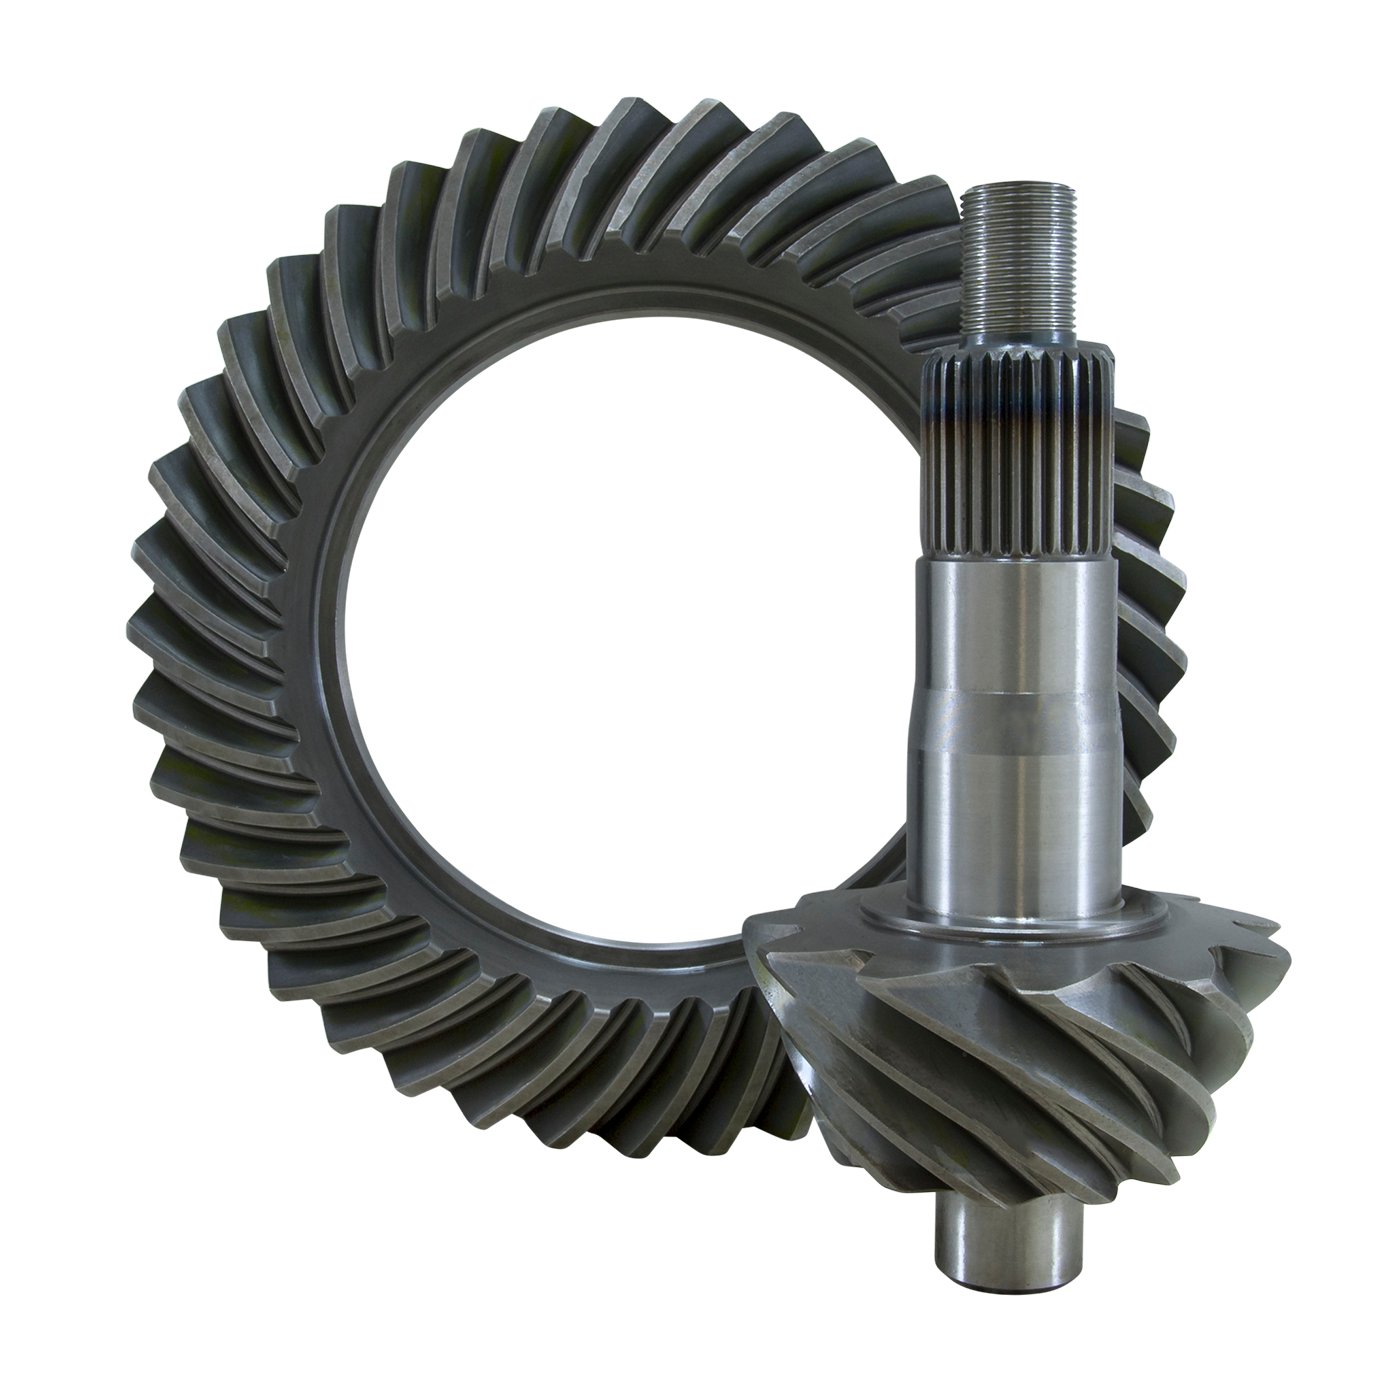 USA Standard 36182 Ring & Pinion Gear Set, For 10.5 in. GM 14 Bolt Truck, 3.73 Ratio